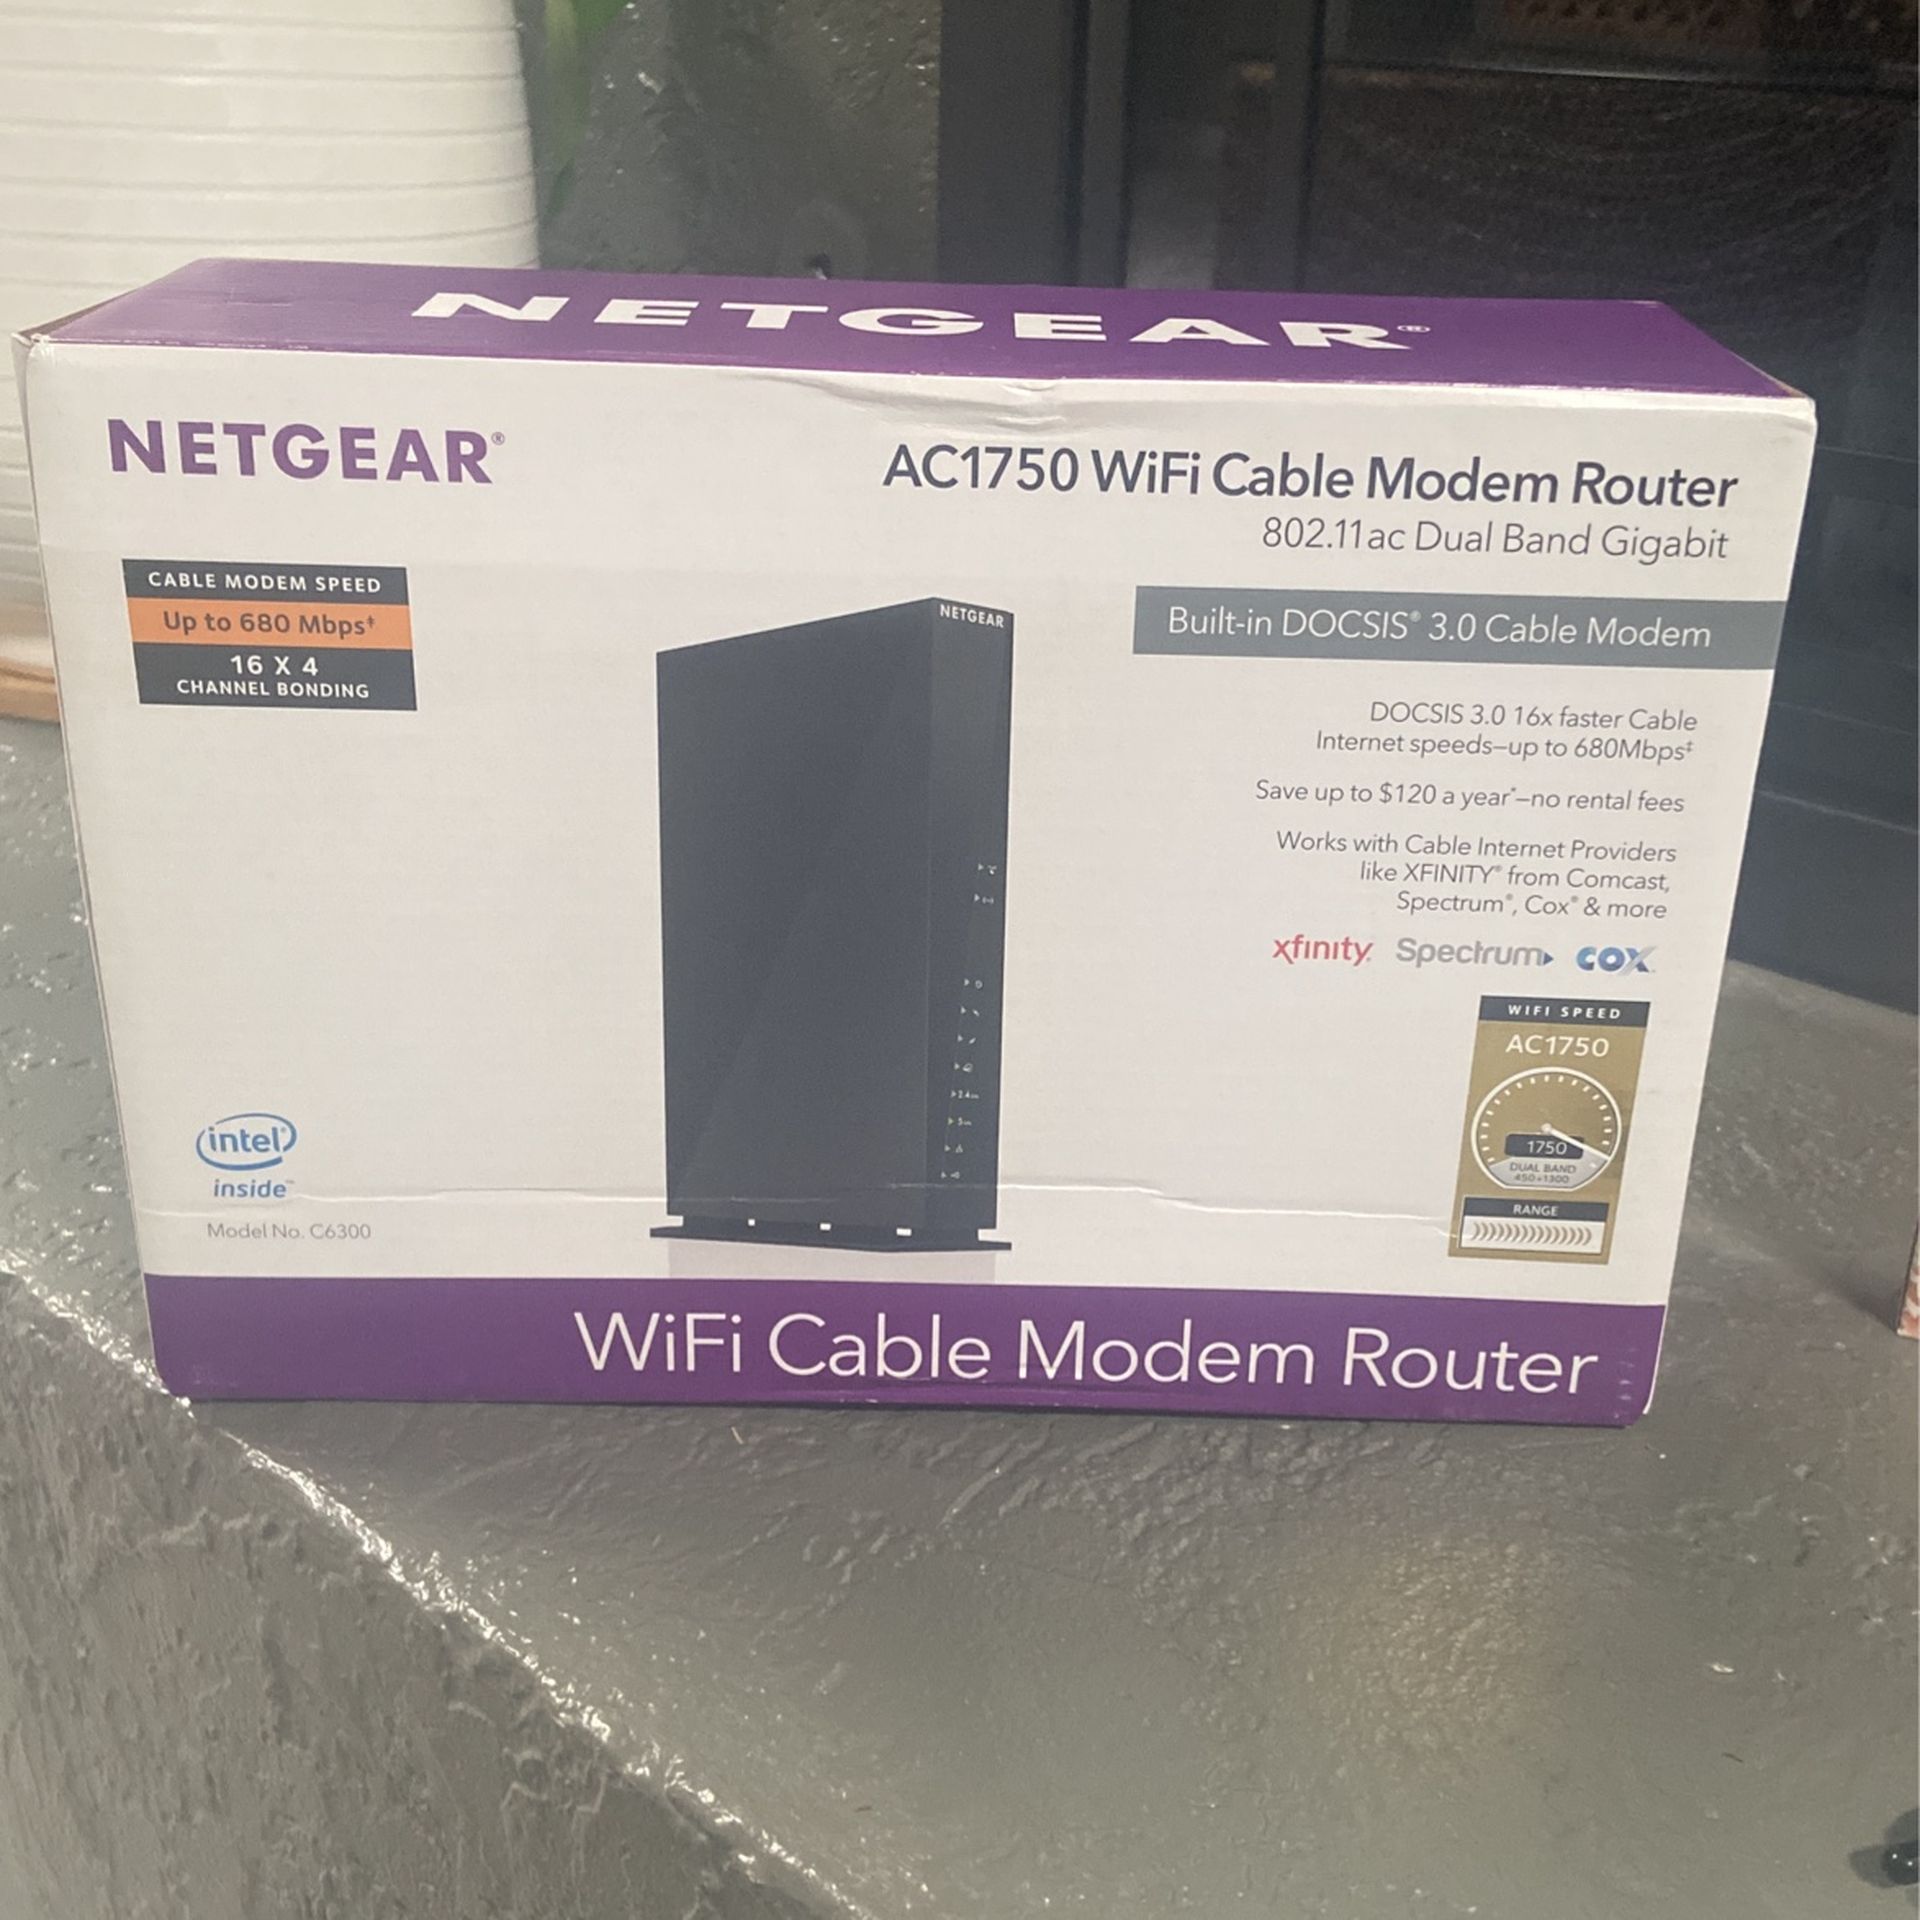 AC1750 Wi-Fi Cable Modem Router